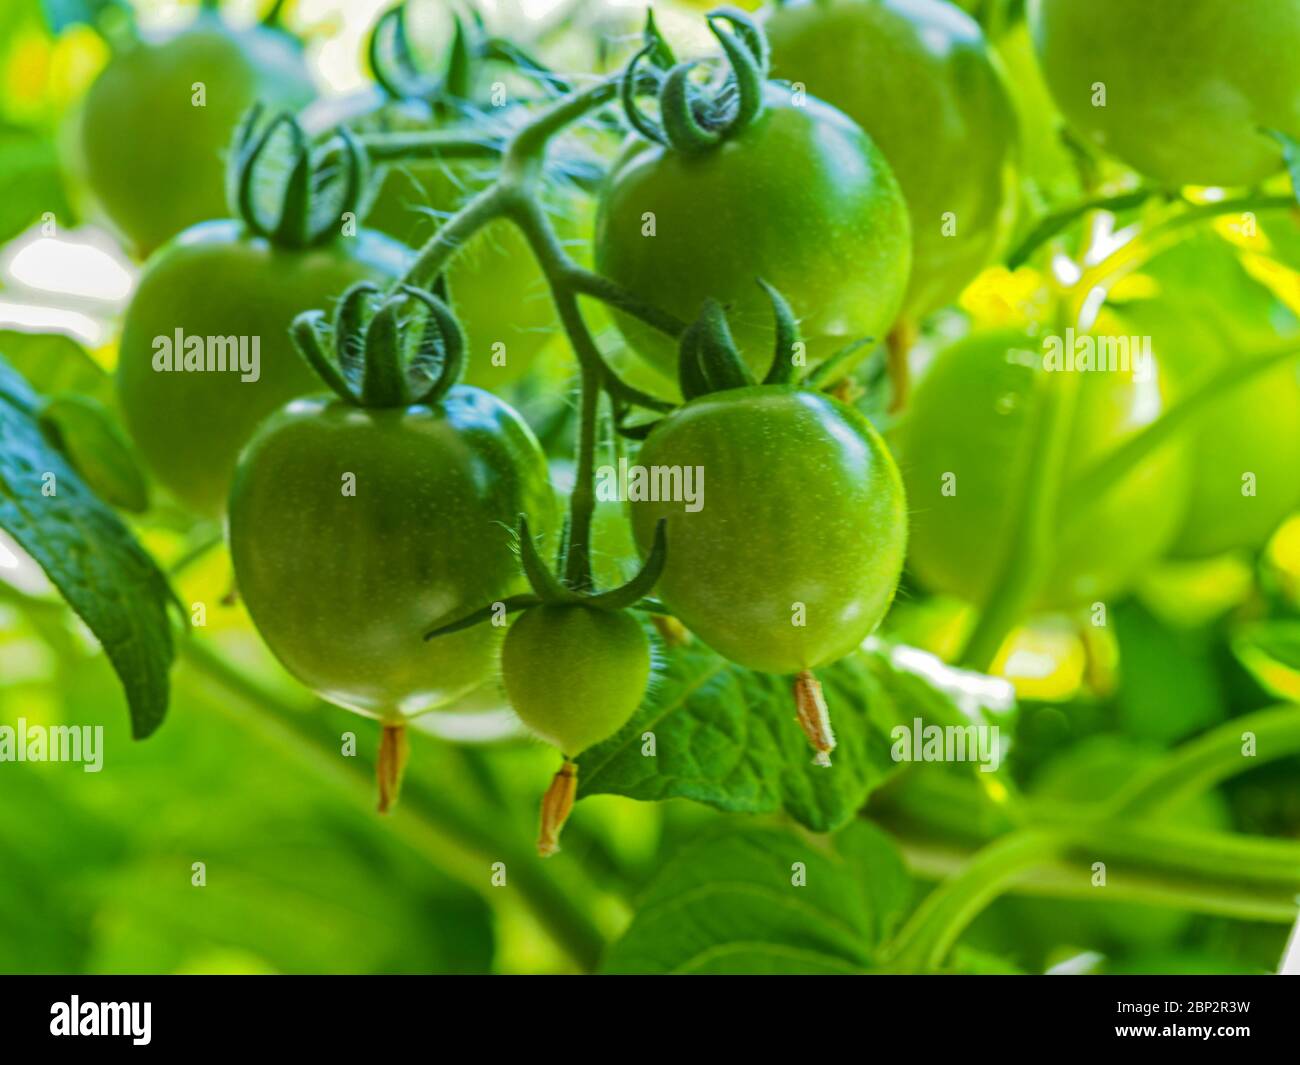 Closeup of a truss of green tomatoes developing on a tomato plant, variety Red Robin Stock Photo